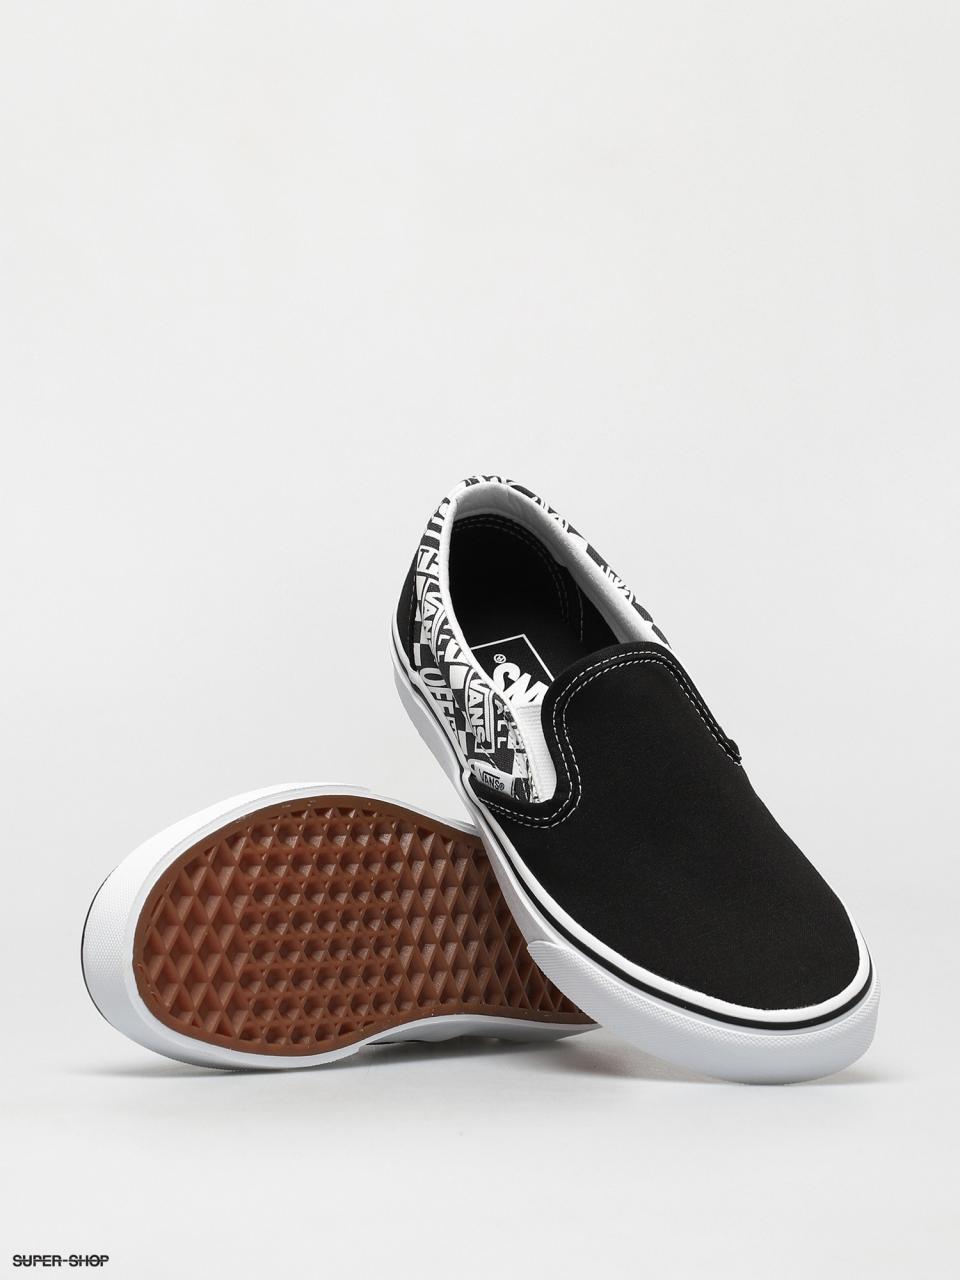 Vans Skate Classics Slip-on Sneakers/Shoes VN0A5FCAOFW - VN0A5FCAOFW